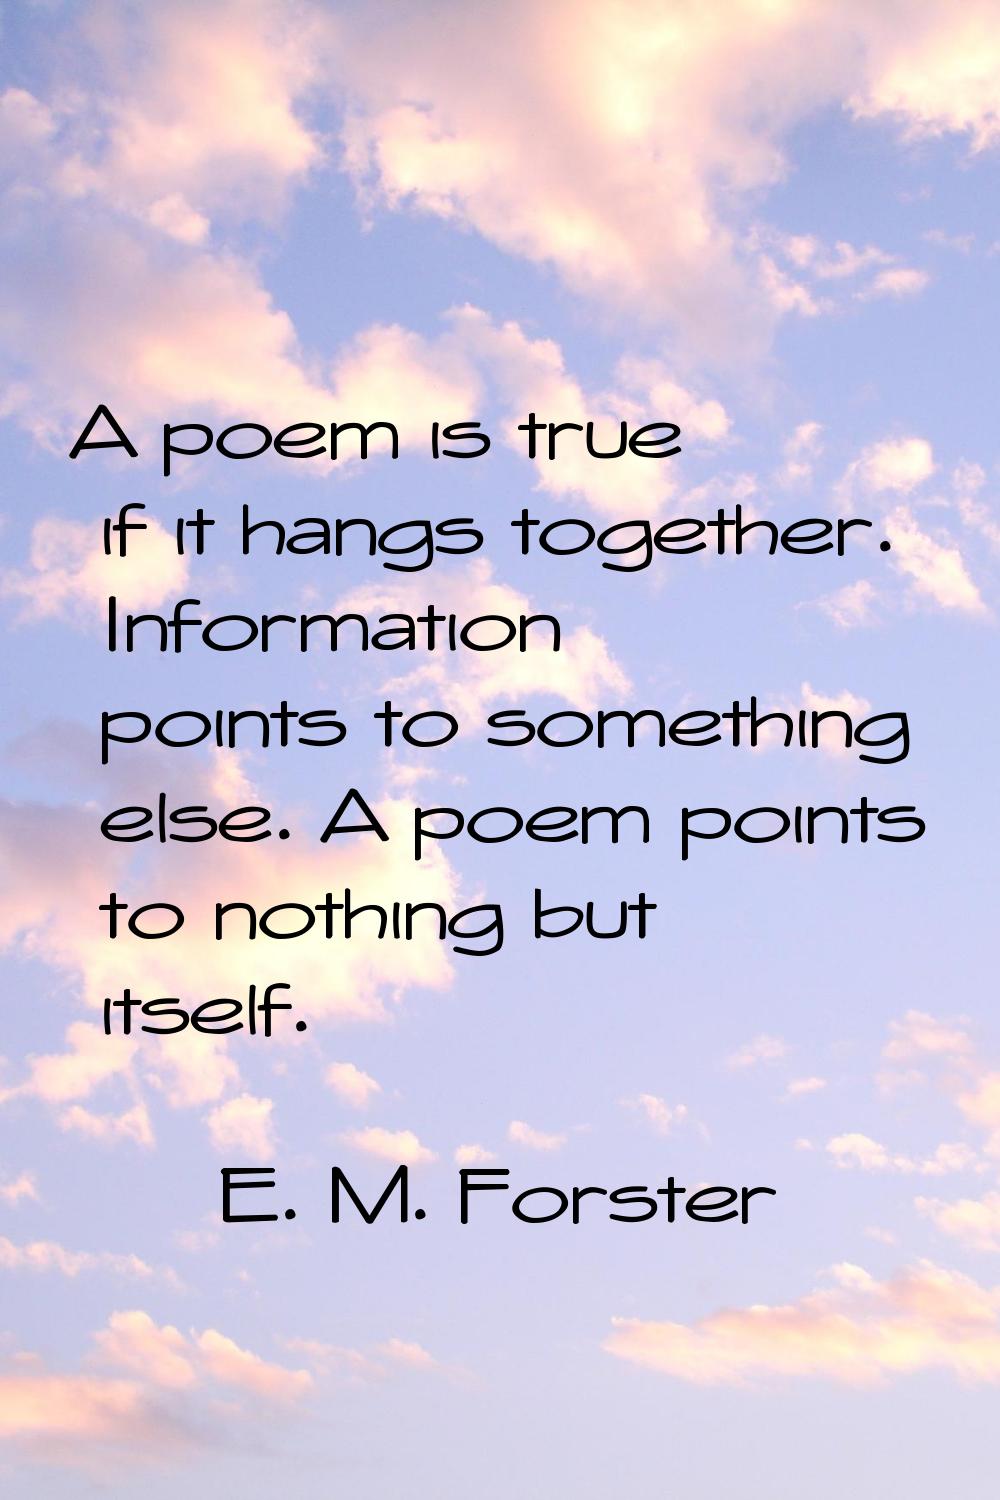 A poem is true if it hangs together. Information points to something else. A poem points to nothing